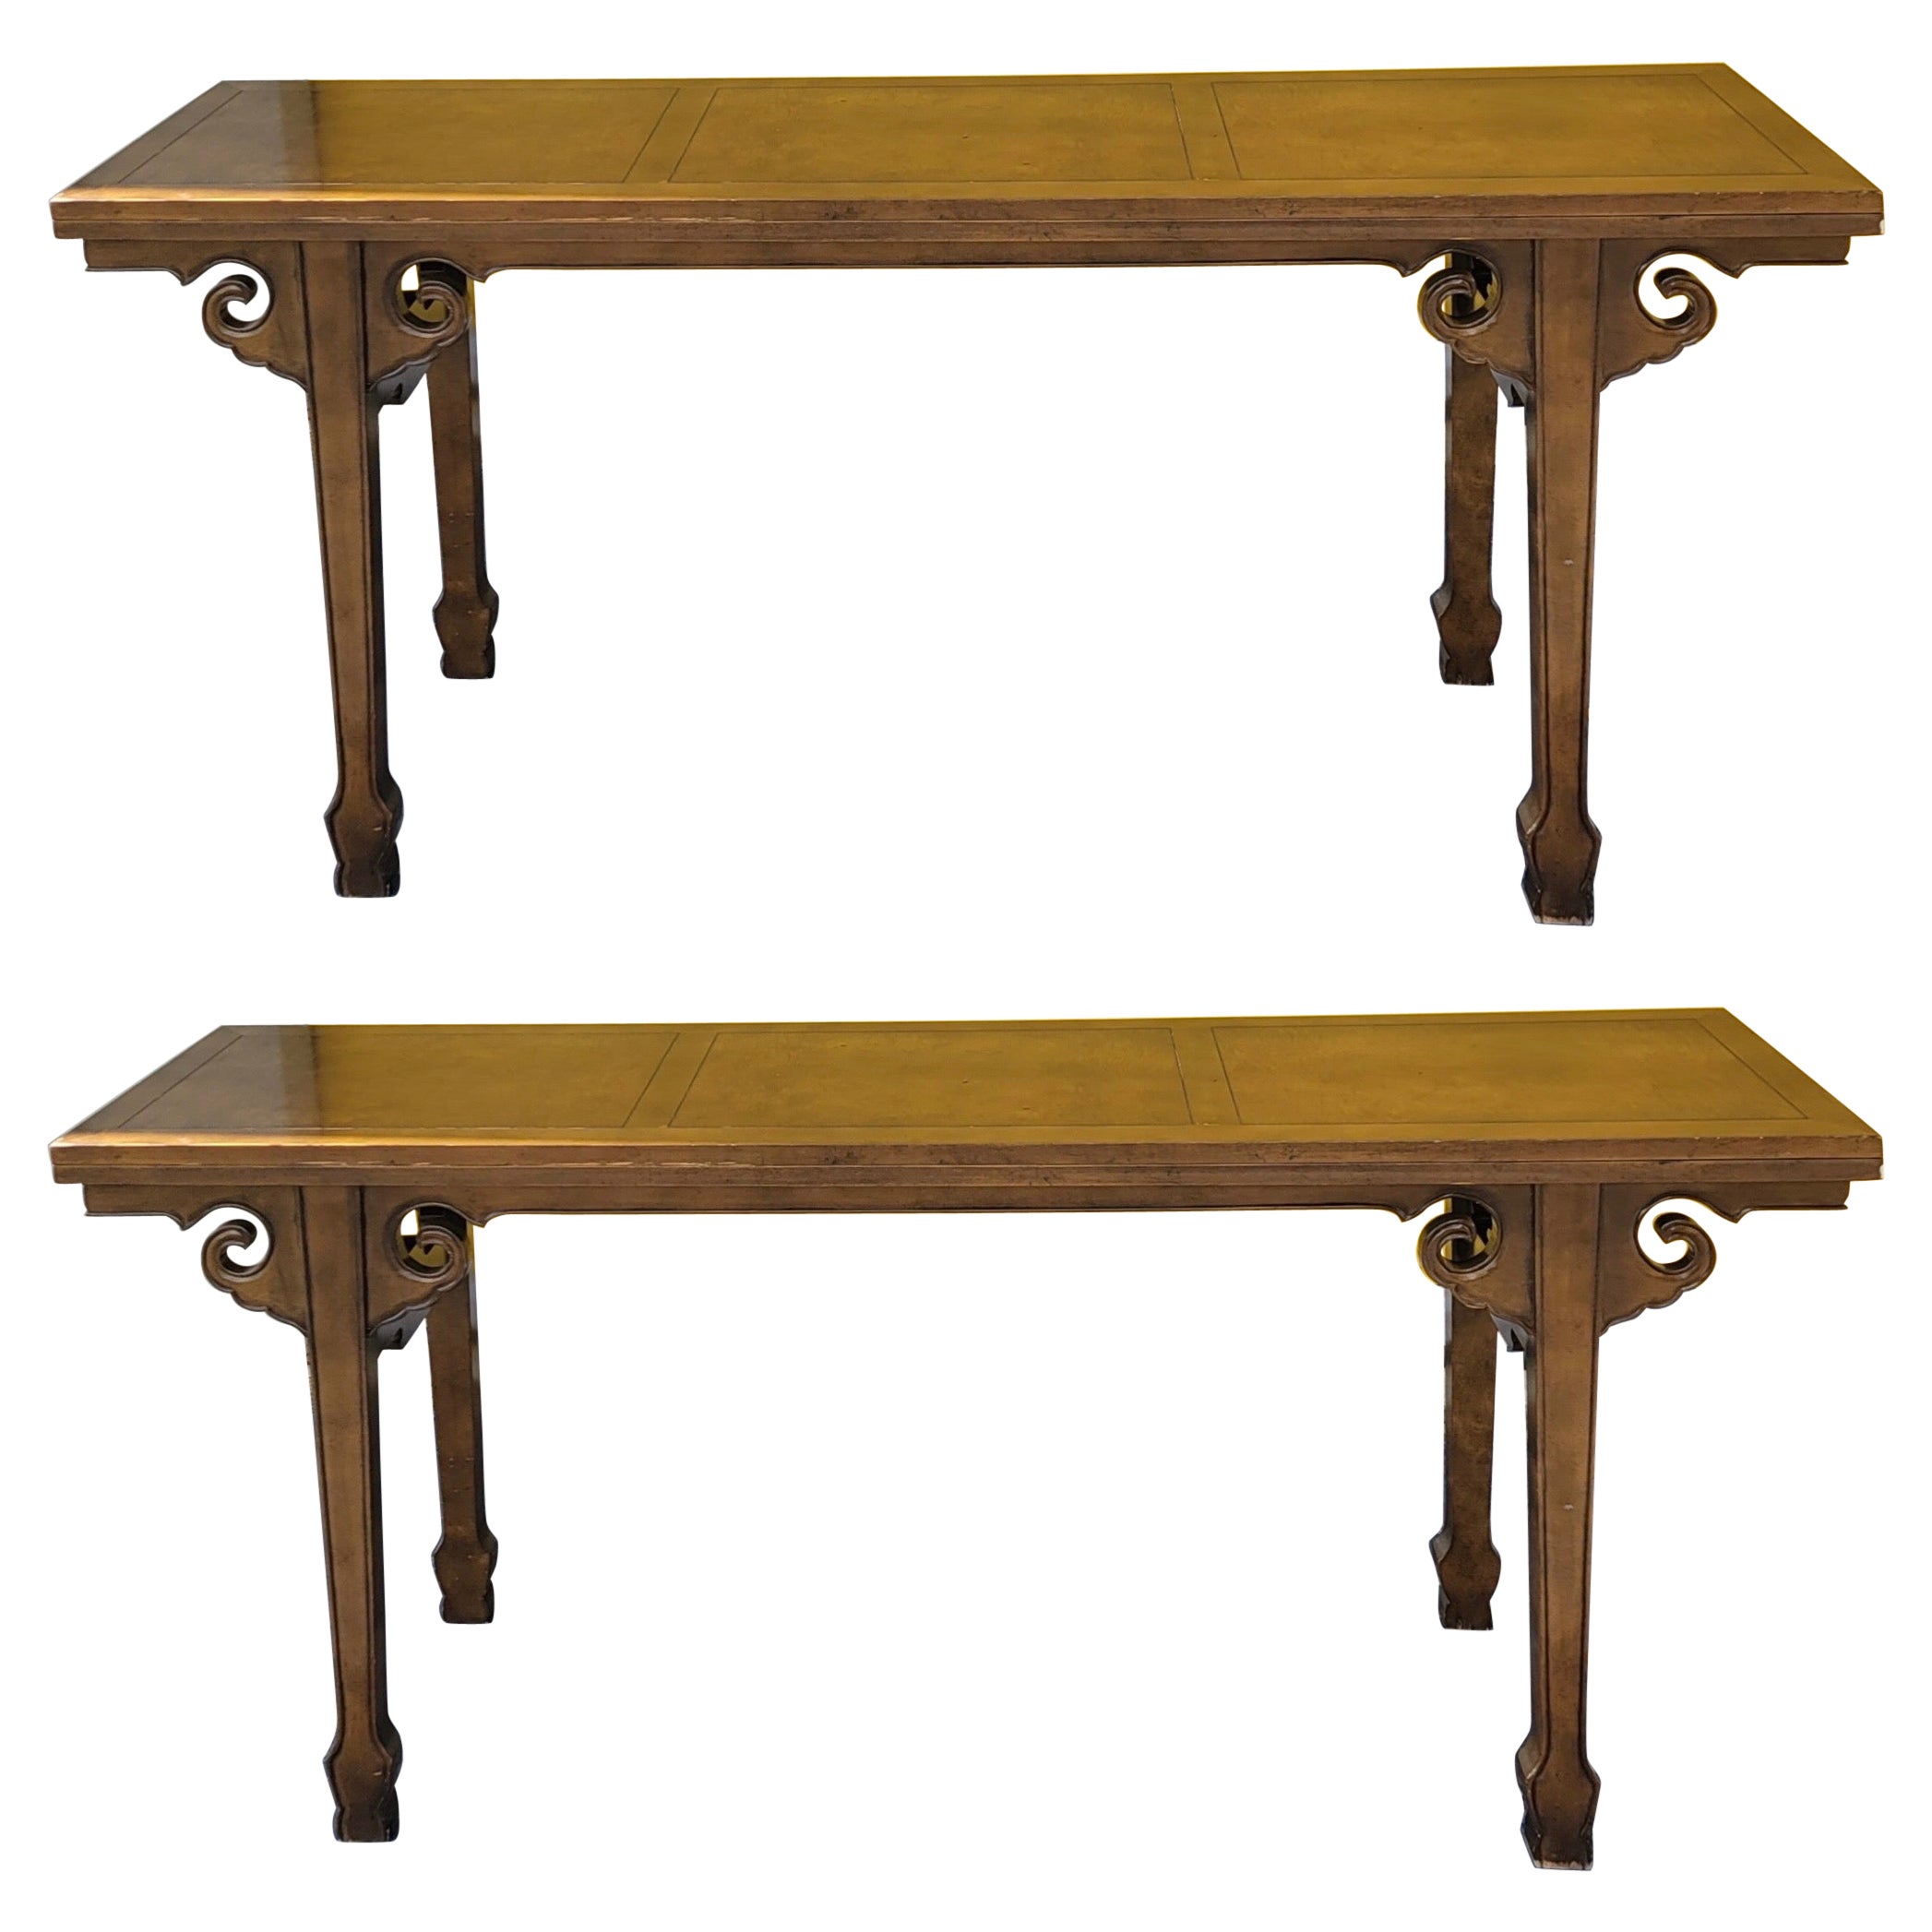 1970s Ming Style Carved Walnut Draw Leaf Alter / Console Tables by Drexel, Pair